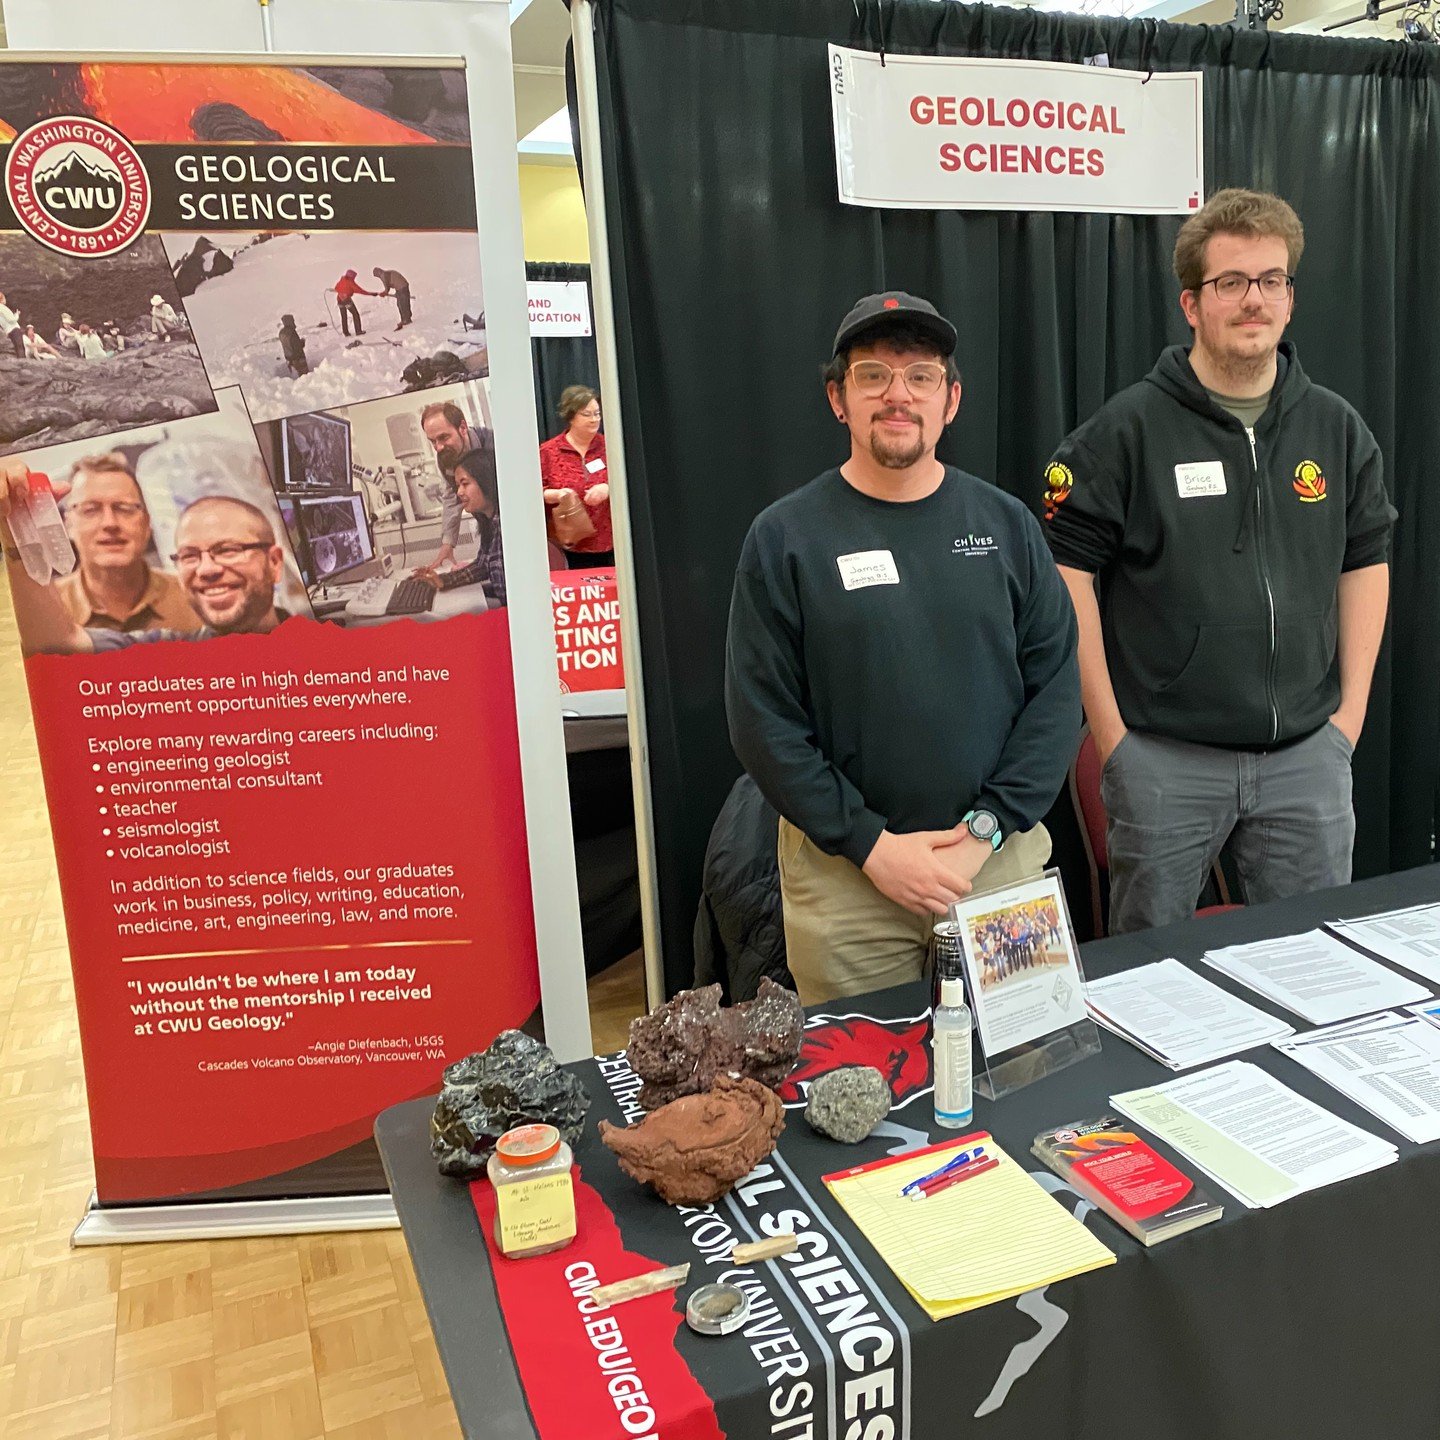 James &amp; Brice recruiting for CWU Geology. Join us!